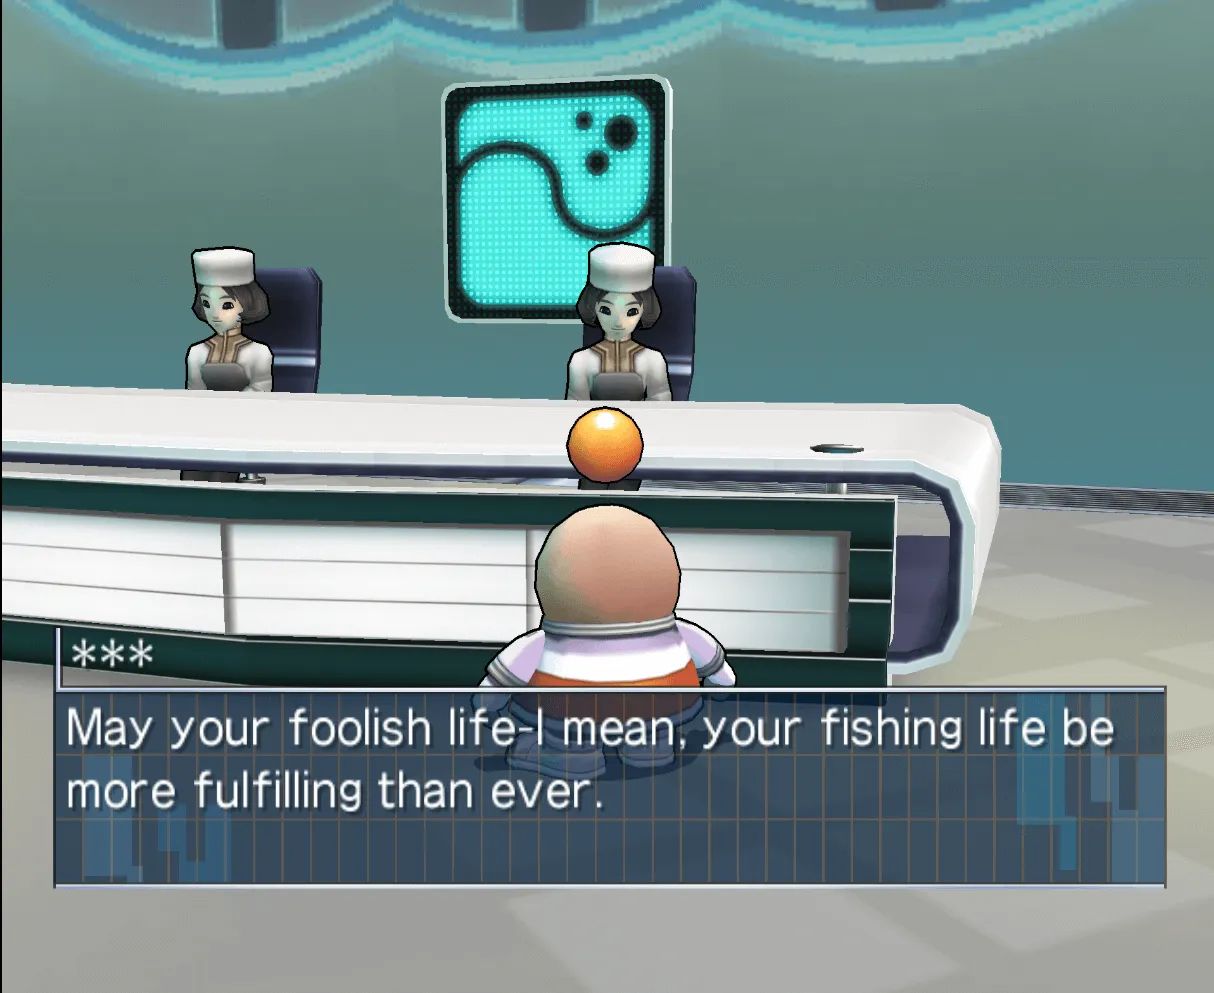 Opoona talking to a clerk. The dialogue reads: May your foolish life - I mean your fishing life be more fulfilling than ever.